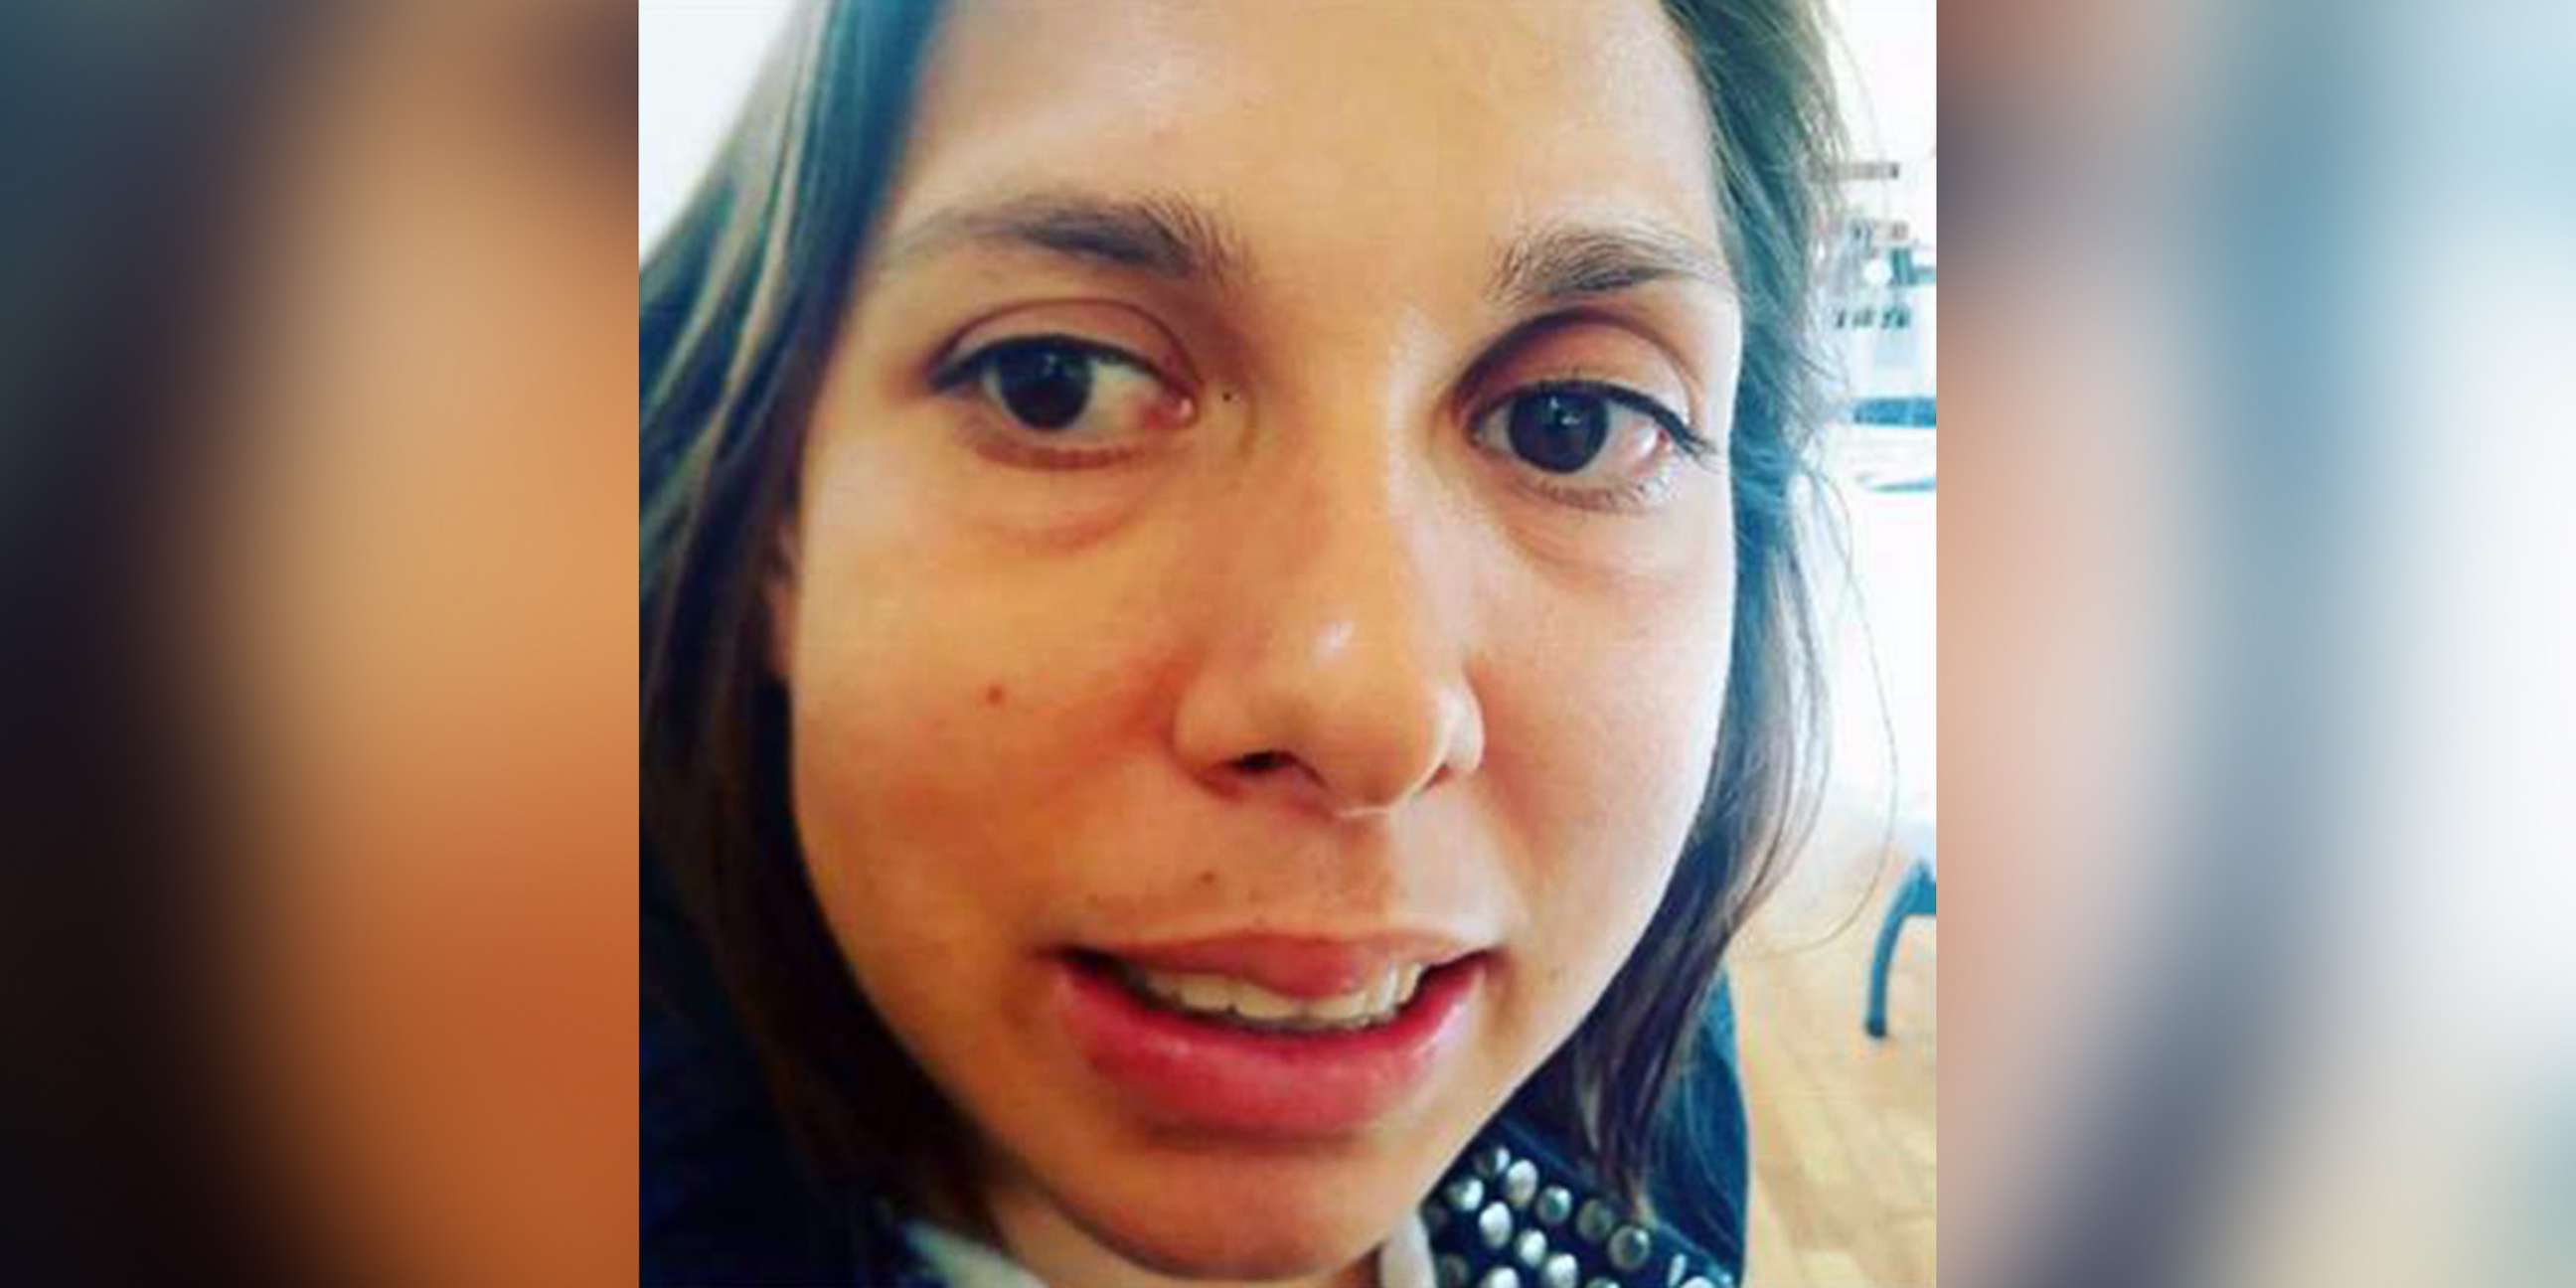 PHOTO: Carla Valpeoz, a partially blind traveler who has gone missing in Peru, is seen in an undated photo released by her employer, the Arab American National Museum.